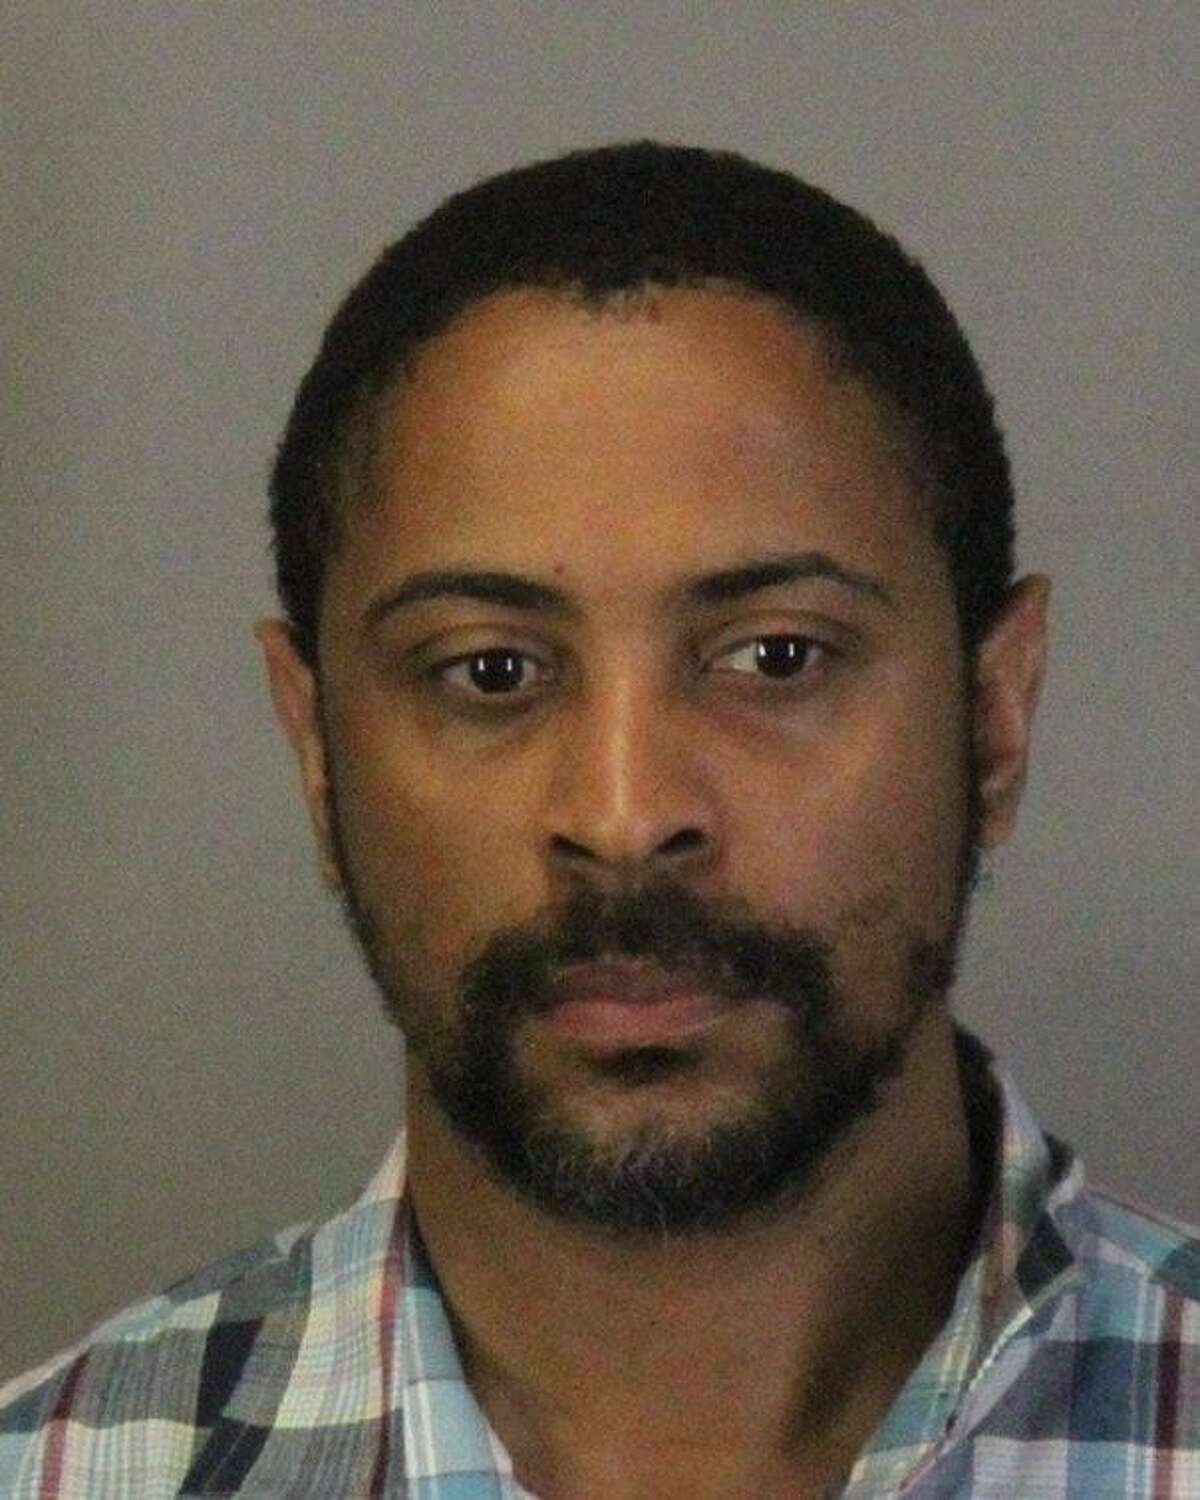 Isaiah Peoples, 34, was identified by police as the driver who stuck eight pedestrians Tuesday evening in Sunnyvale.